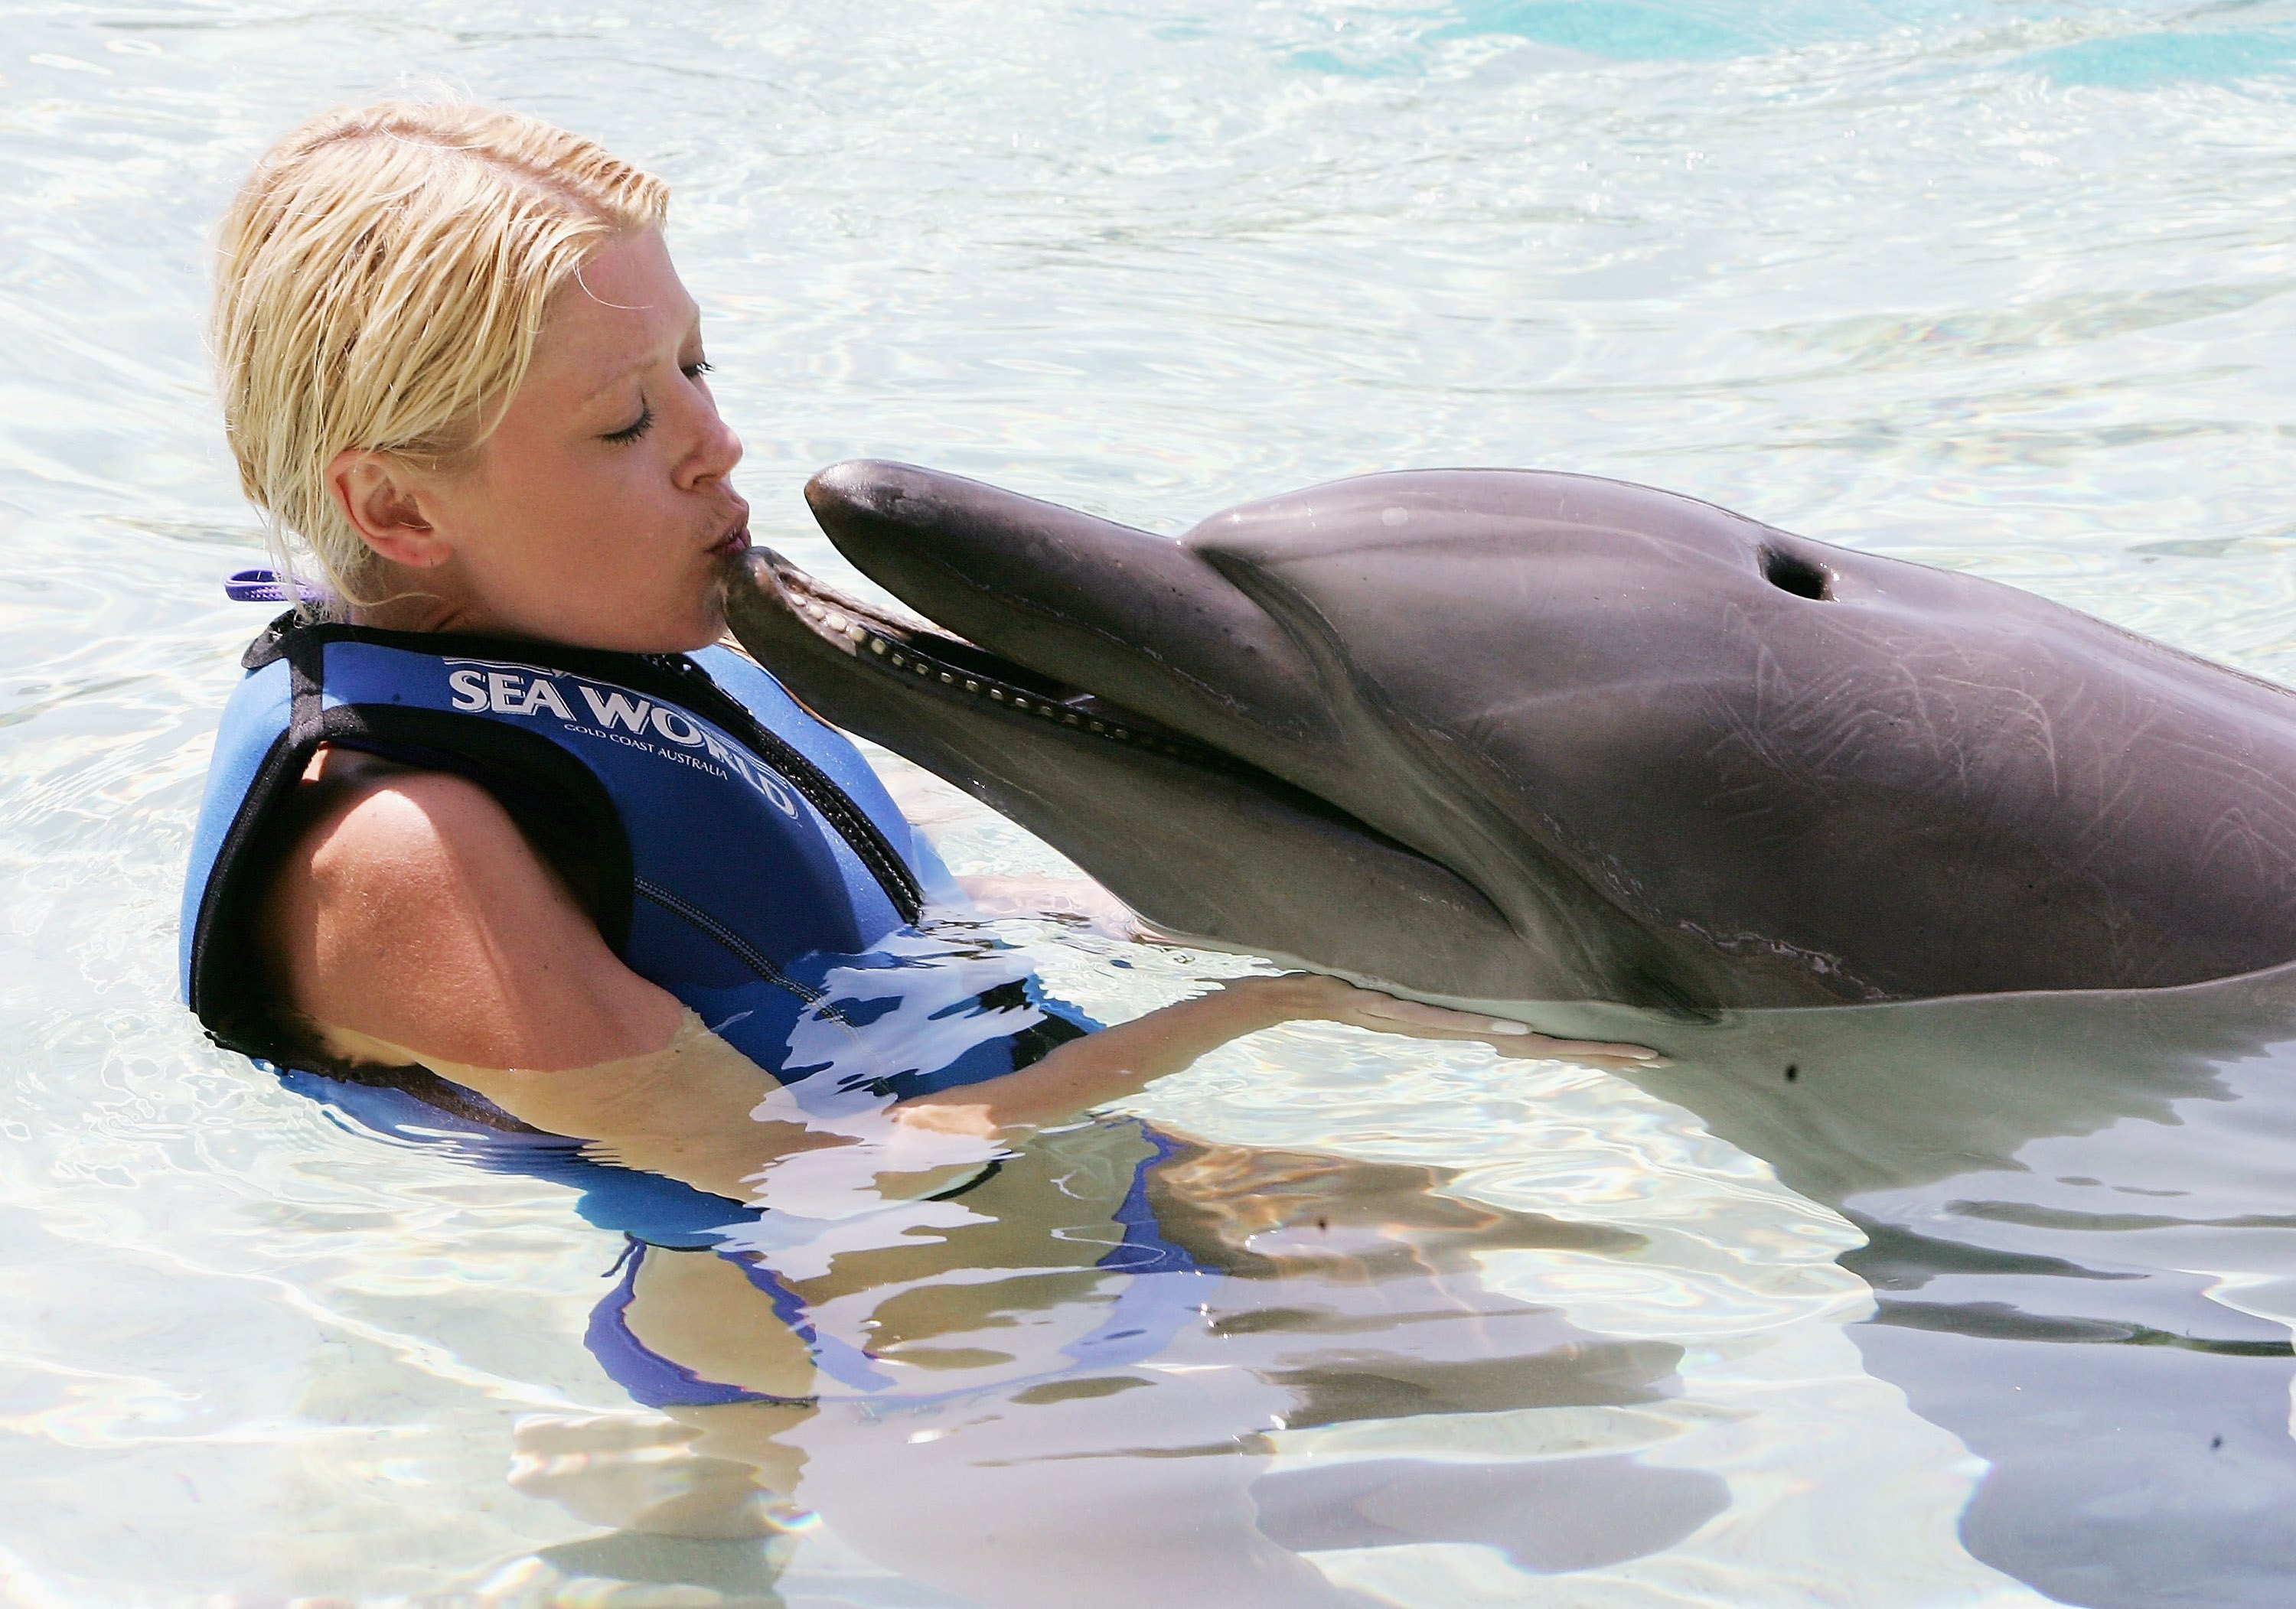 Dolphin at SeaWorld bites 9-year-old, prompts outcry from PETA